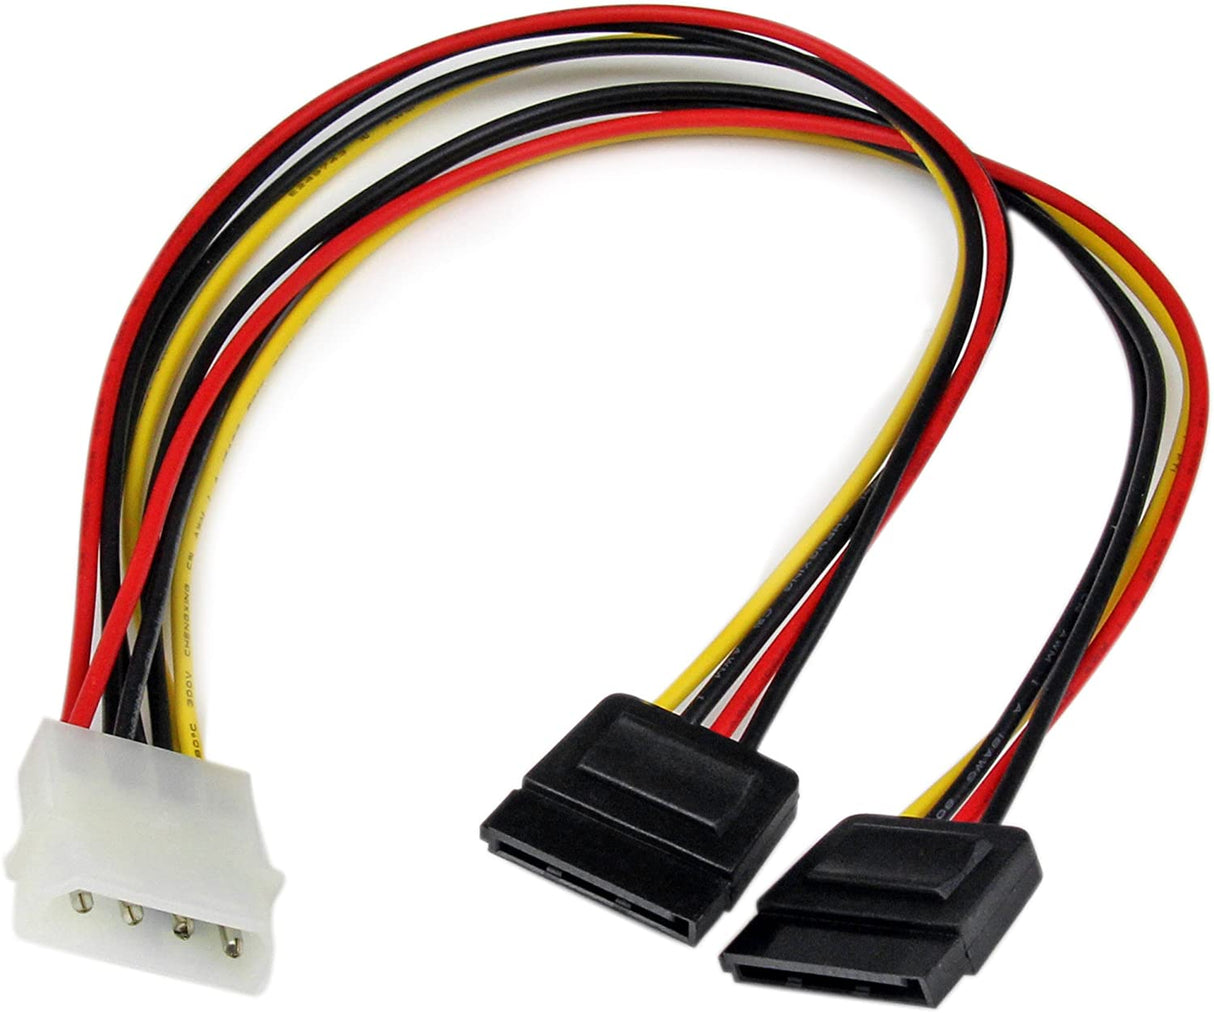 StarTech.com 12in LP4 to 2x SATA Power Y Cable Adapter - Molex to to Dual SATA Power Adapter Splitter (PYO2LP4SATA)